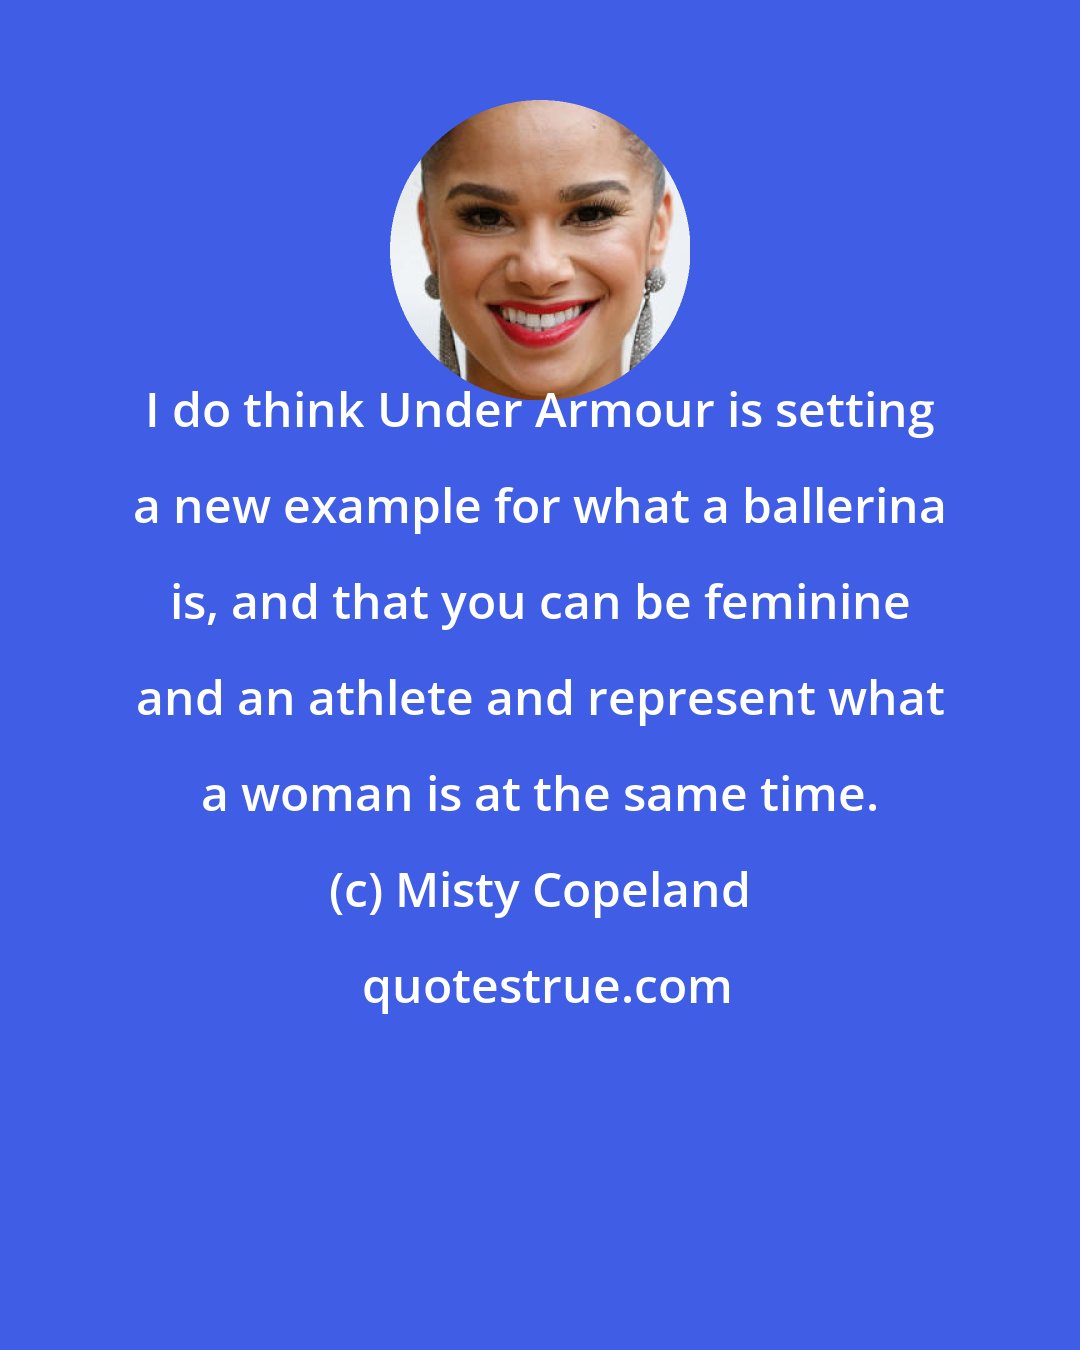 Misty Copeland: I do think Under Armour is setting a new example for what a ballerina is, and that you can be feminine and an athlete and represent what a woman is at the same time.